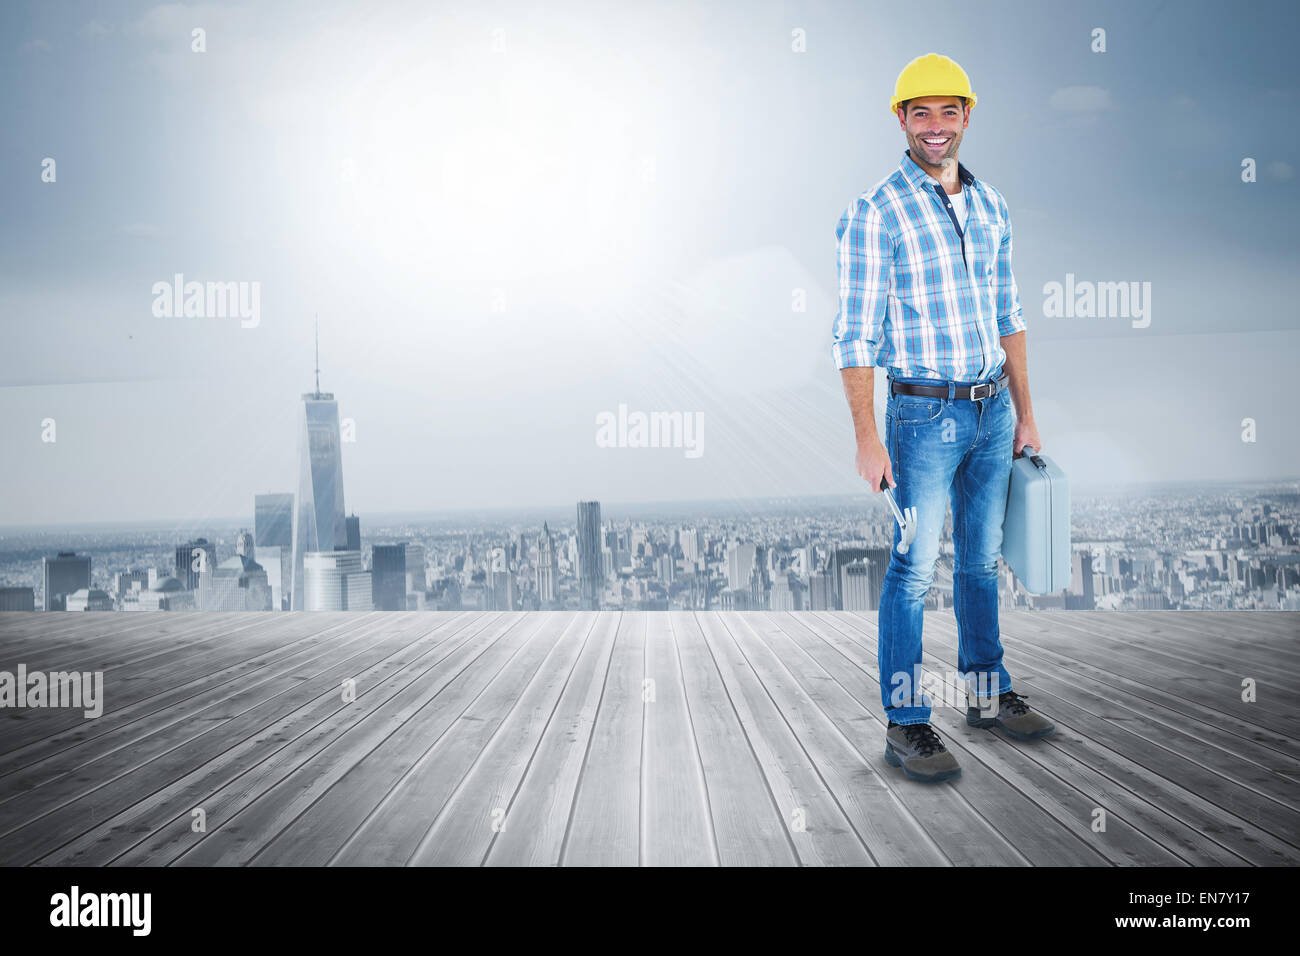 Composite image of manual worker with hammer and toolbox Stock Photo